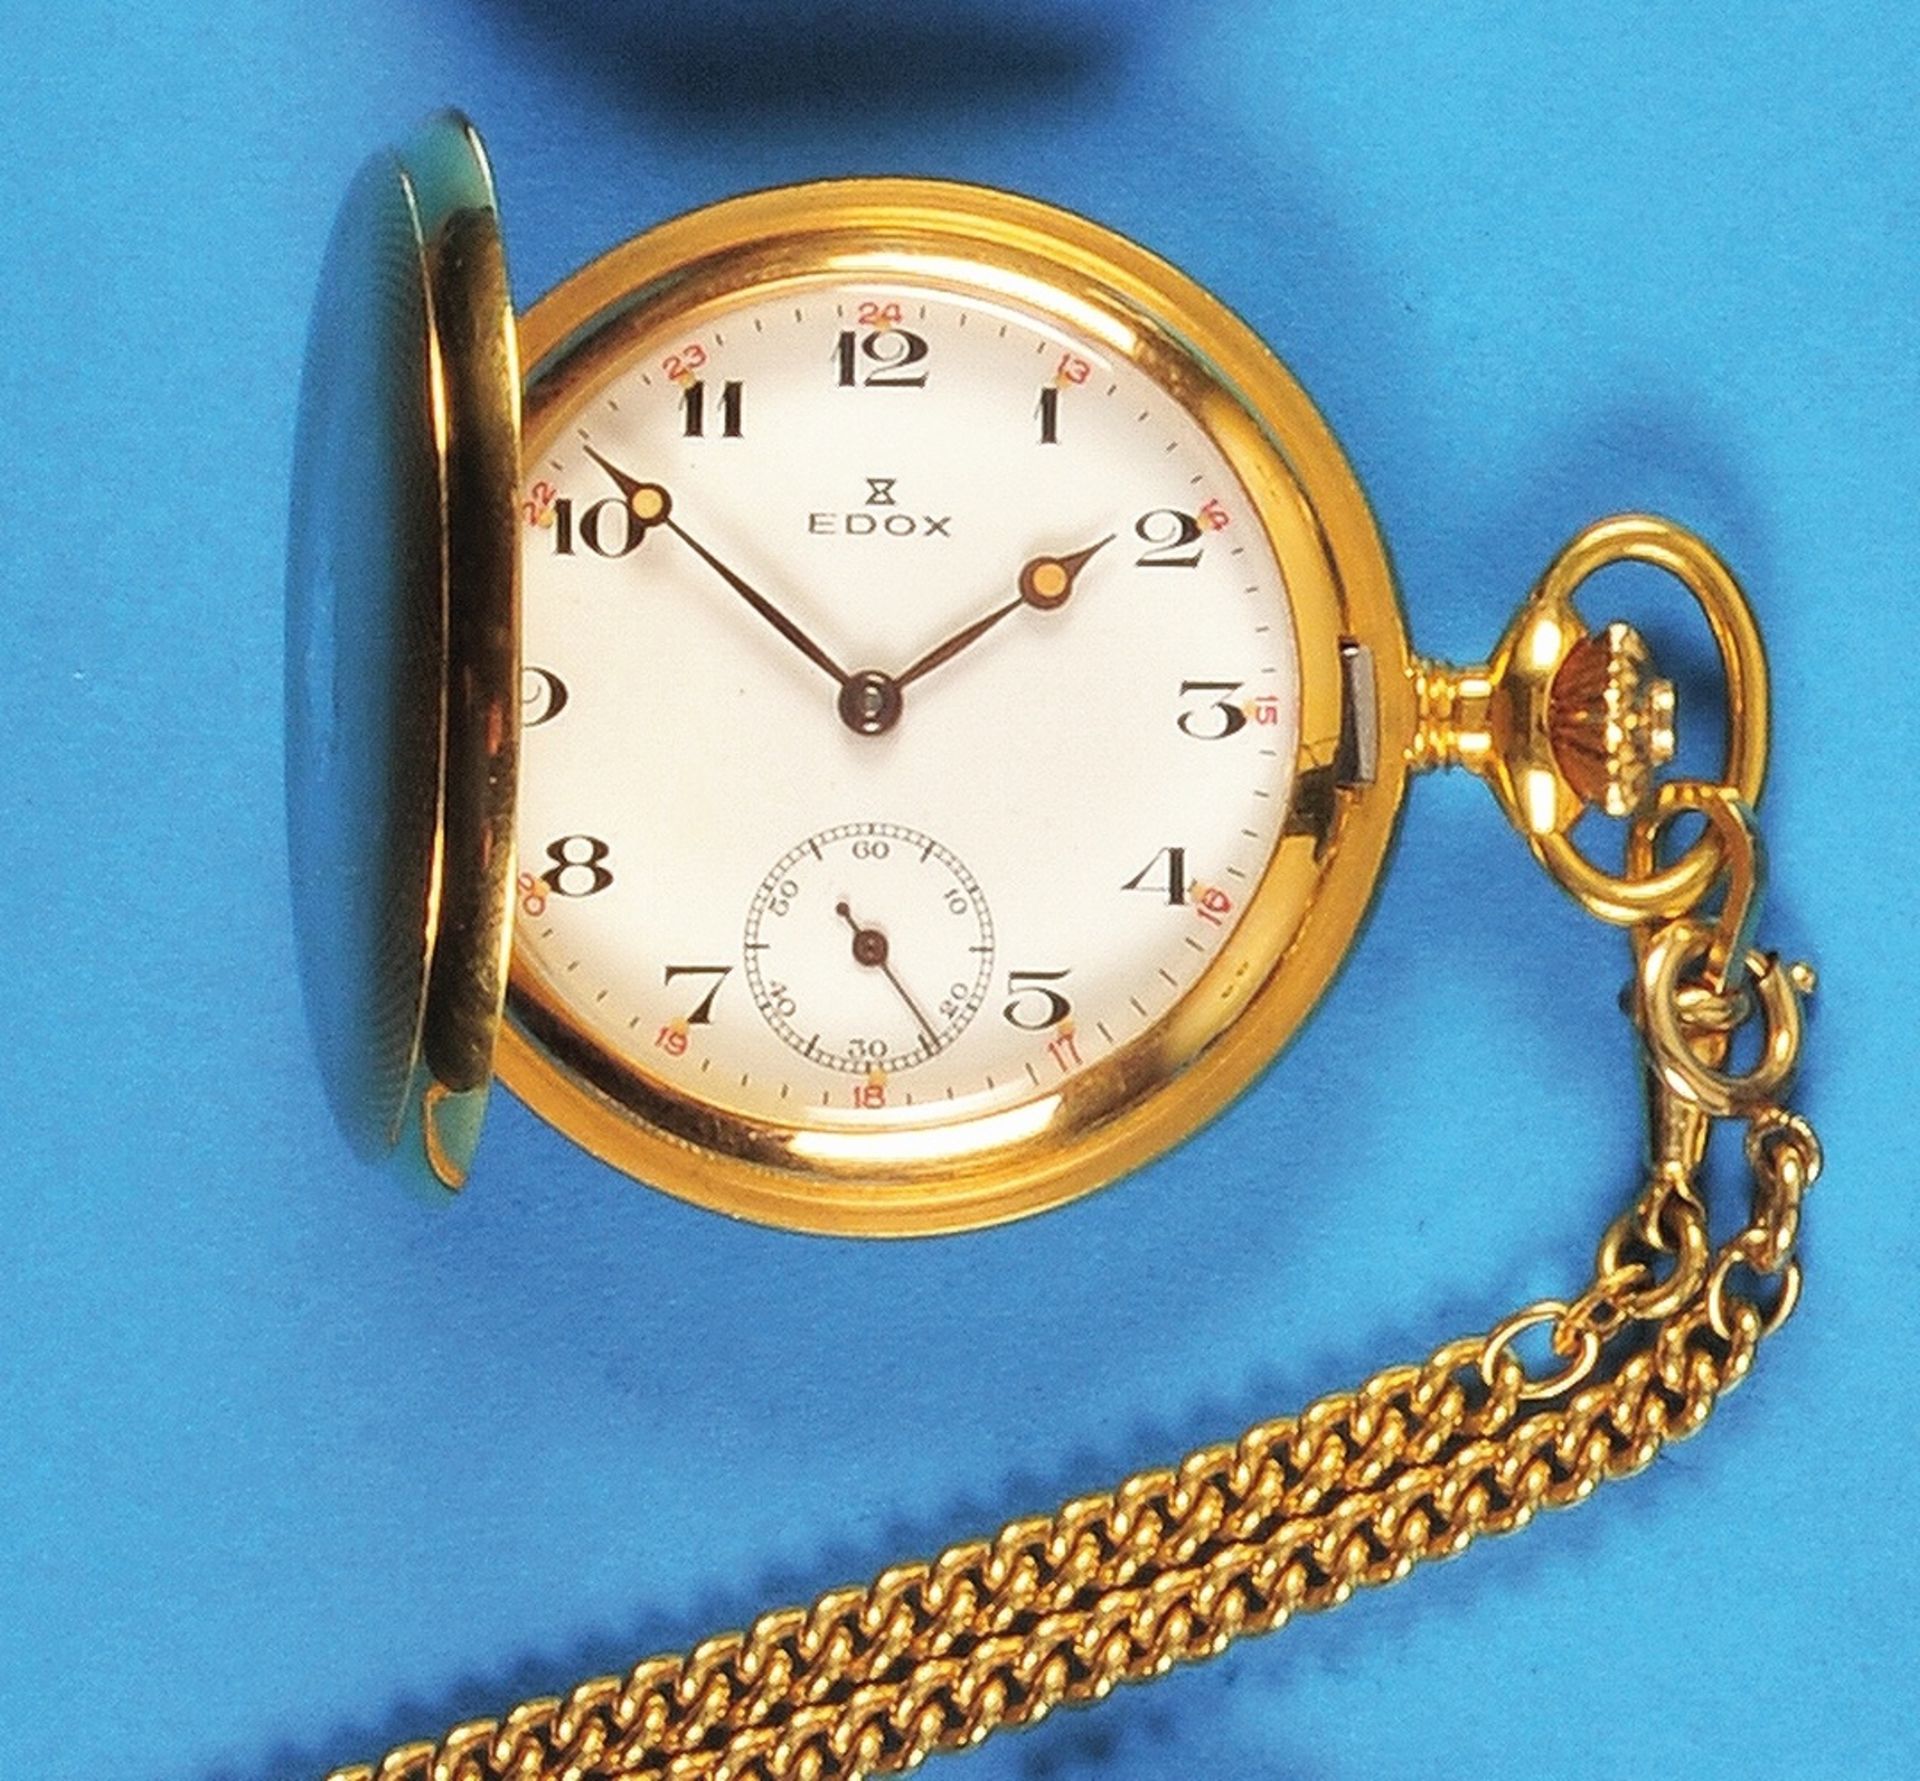 Gold-plated pocket watch with spring cover and gold-plated pocket watch chain, EDOX